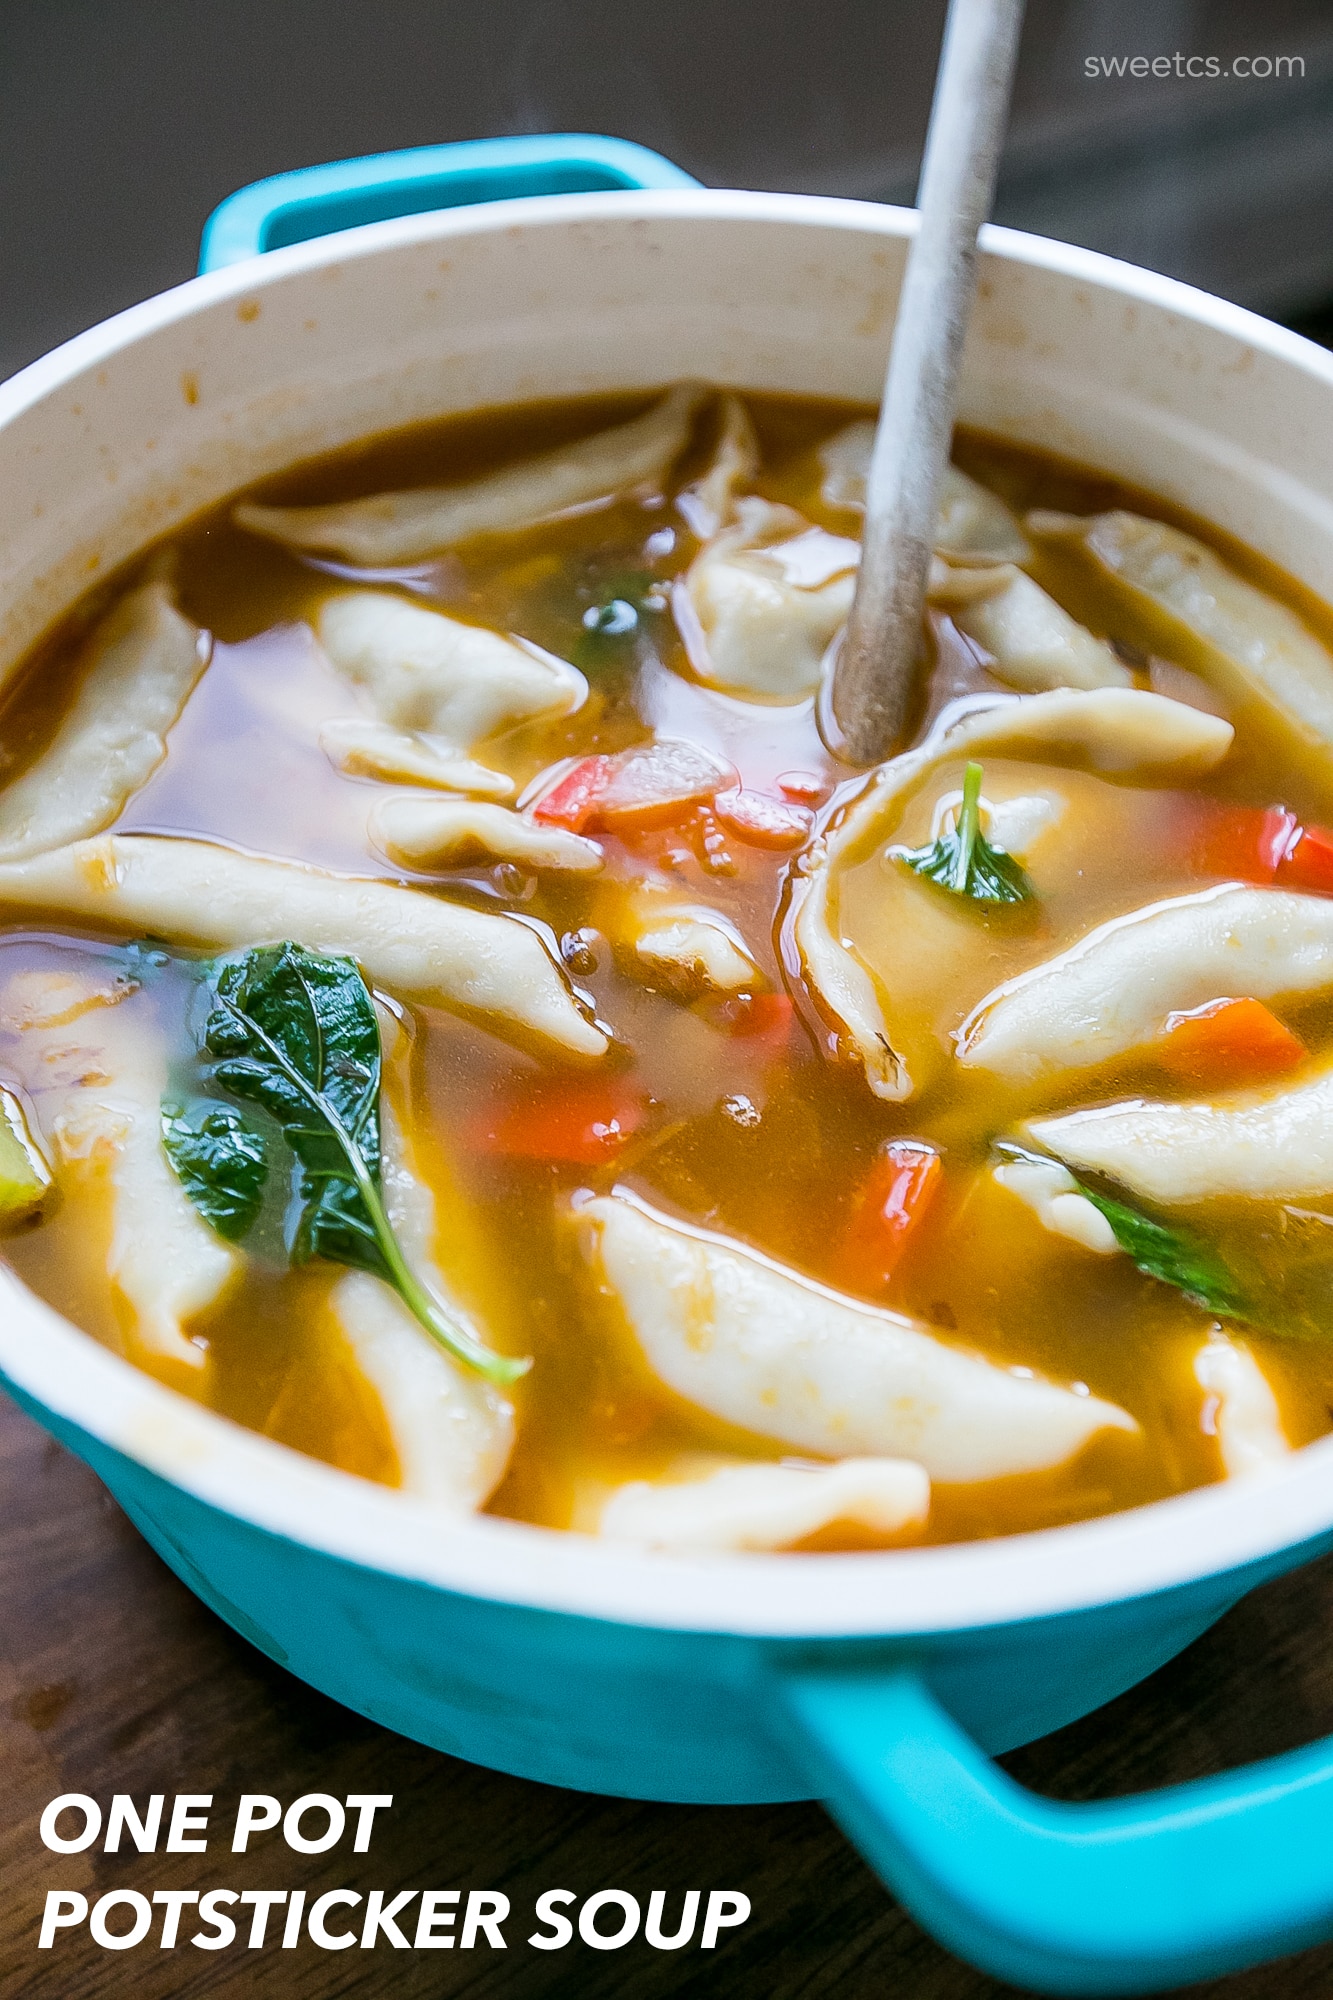 potsticker soup that just takes 1 pot and 15 minutes- YUM!